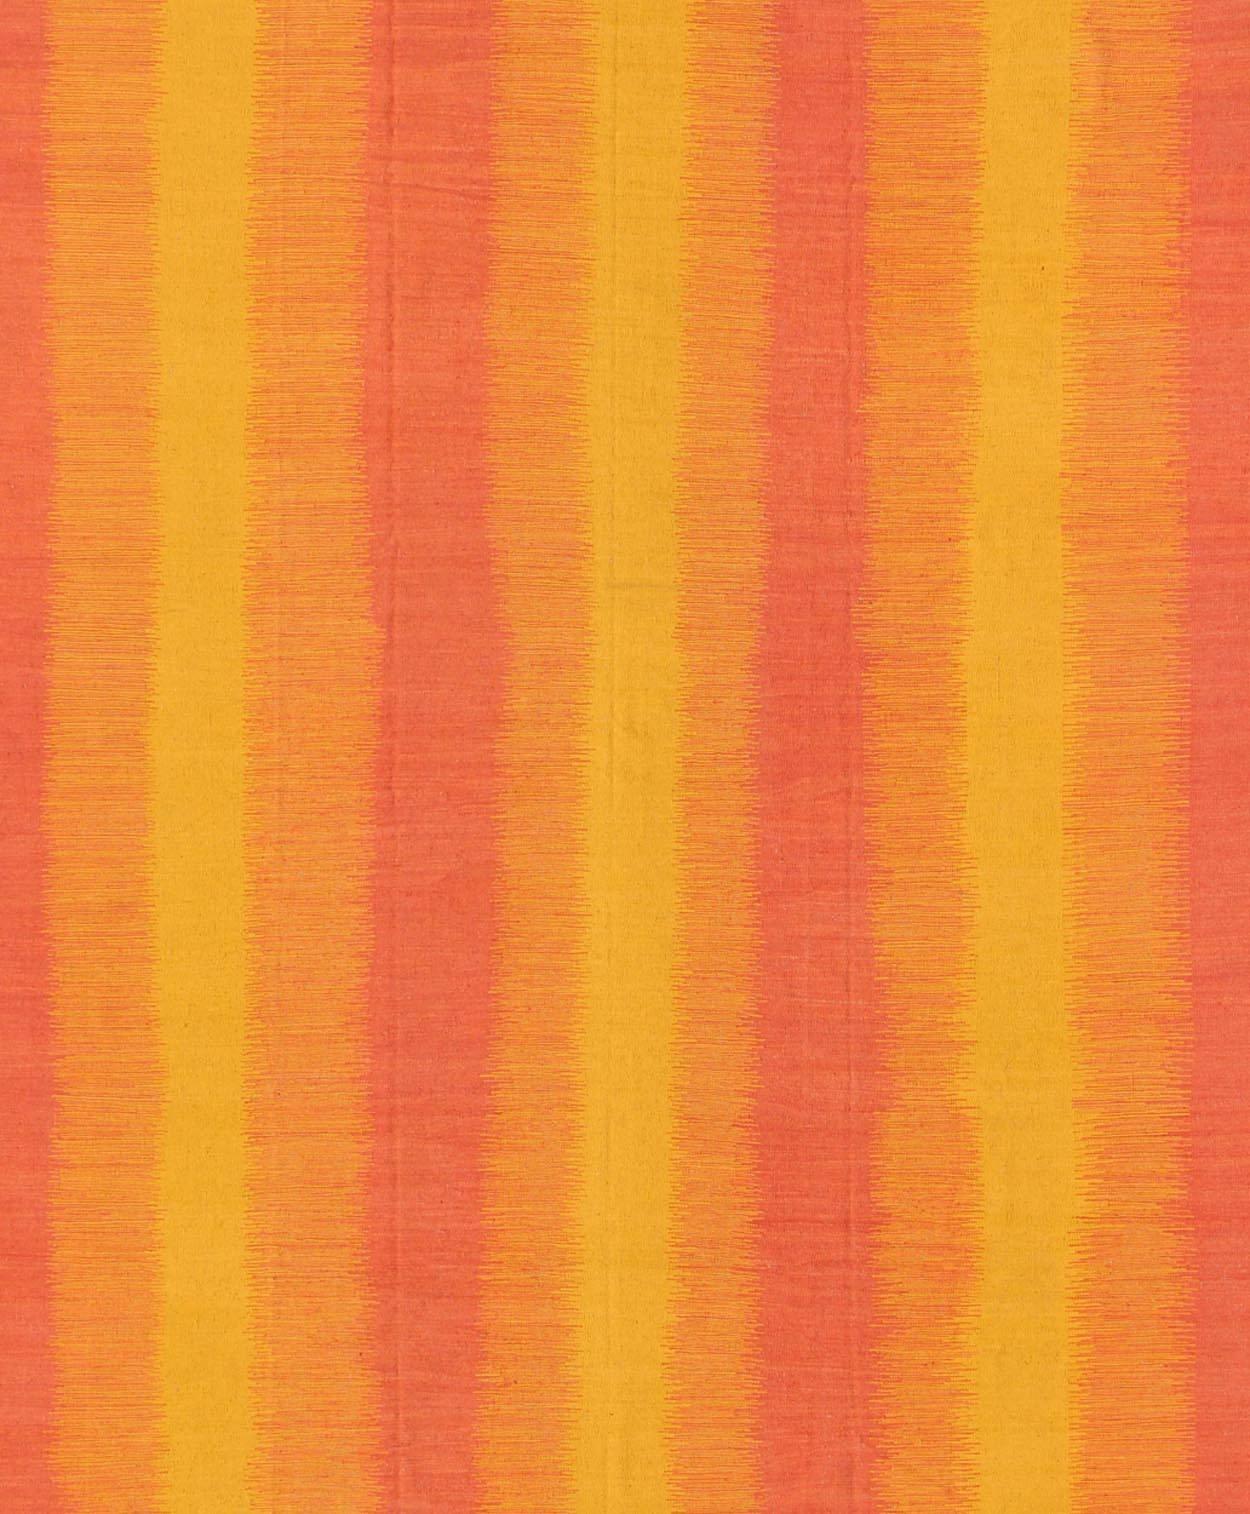 Hand-Woven Sunset Striped Afghan Kilim Rug in Yellow, Orange, Pink For Sale